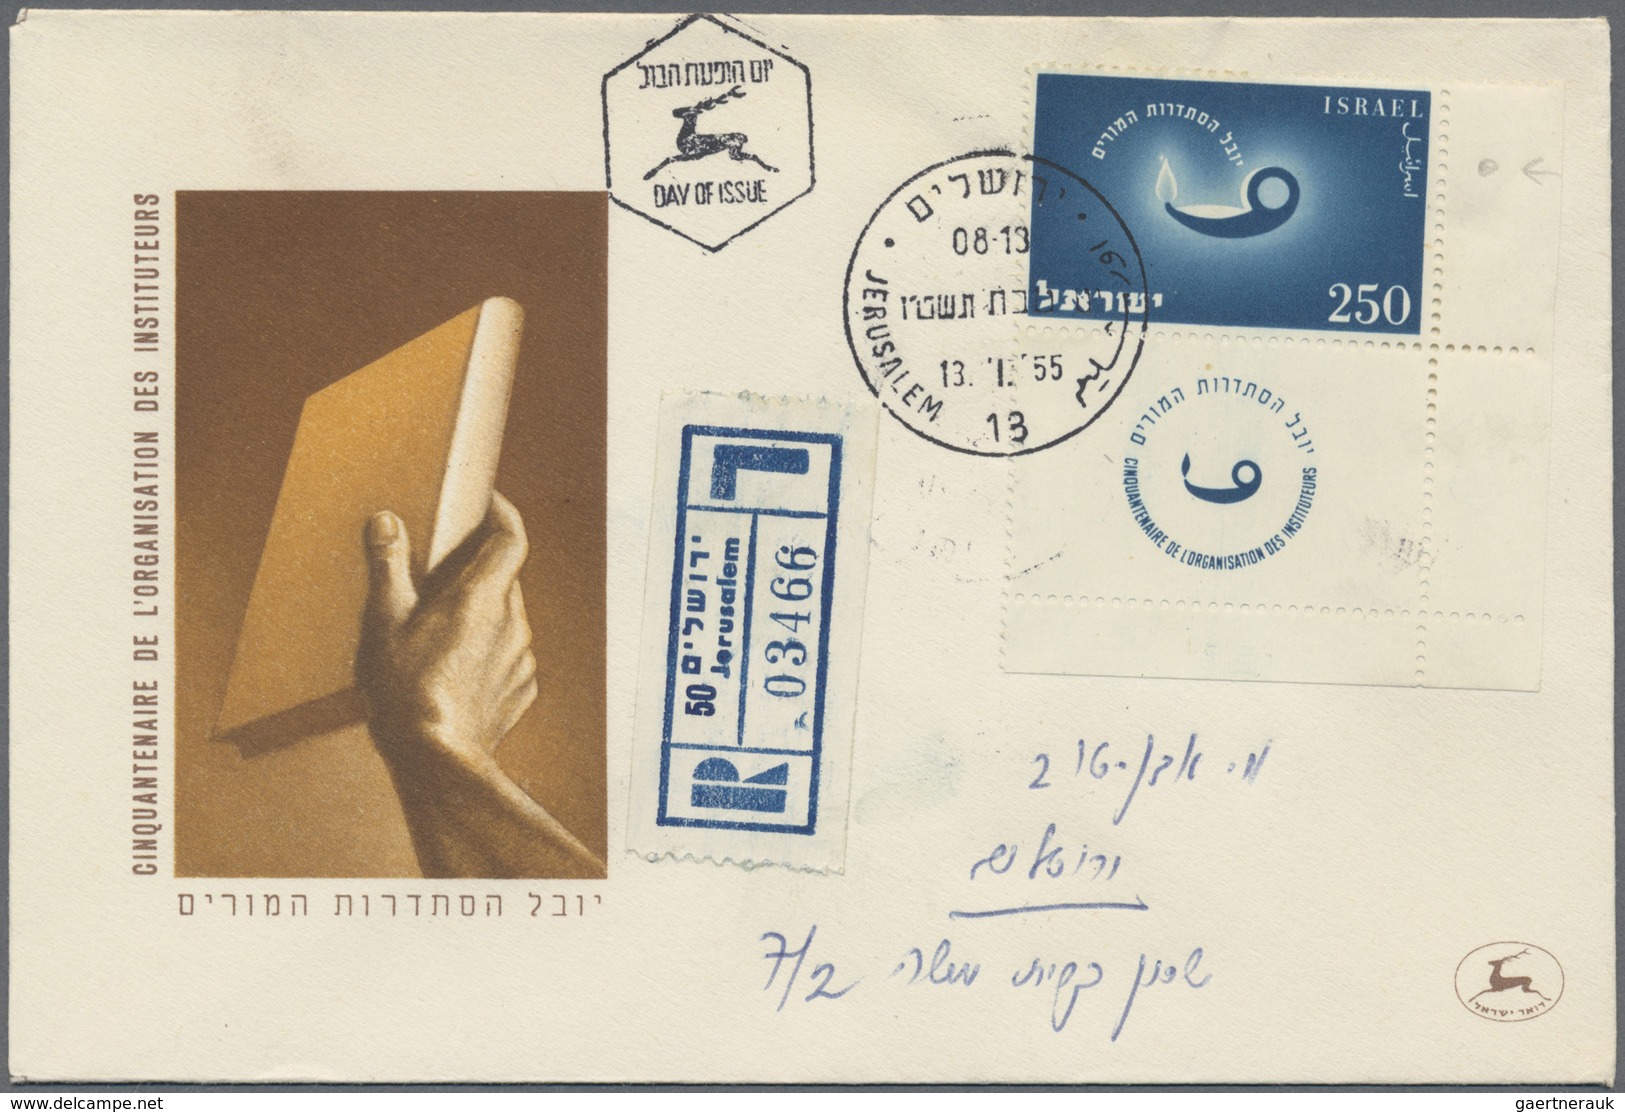 Israel: 1948/1993, collection/accumulation of apprx. 430 covers (f.d.c./commemorative covers referri